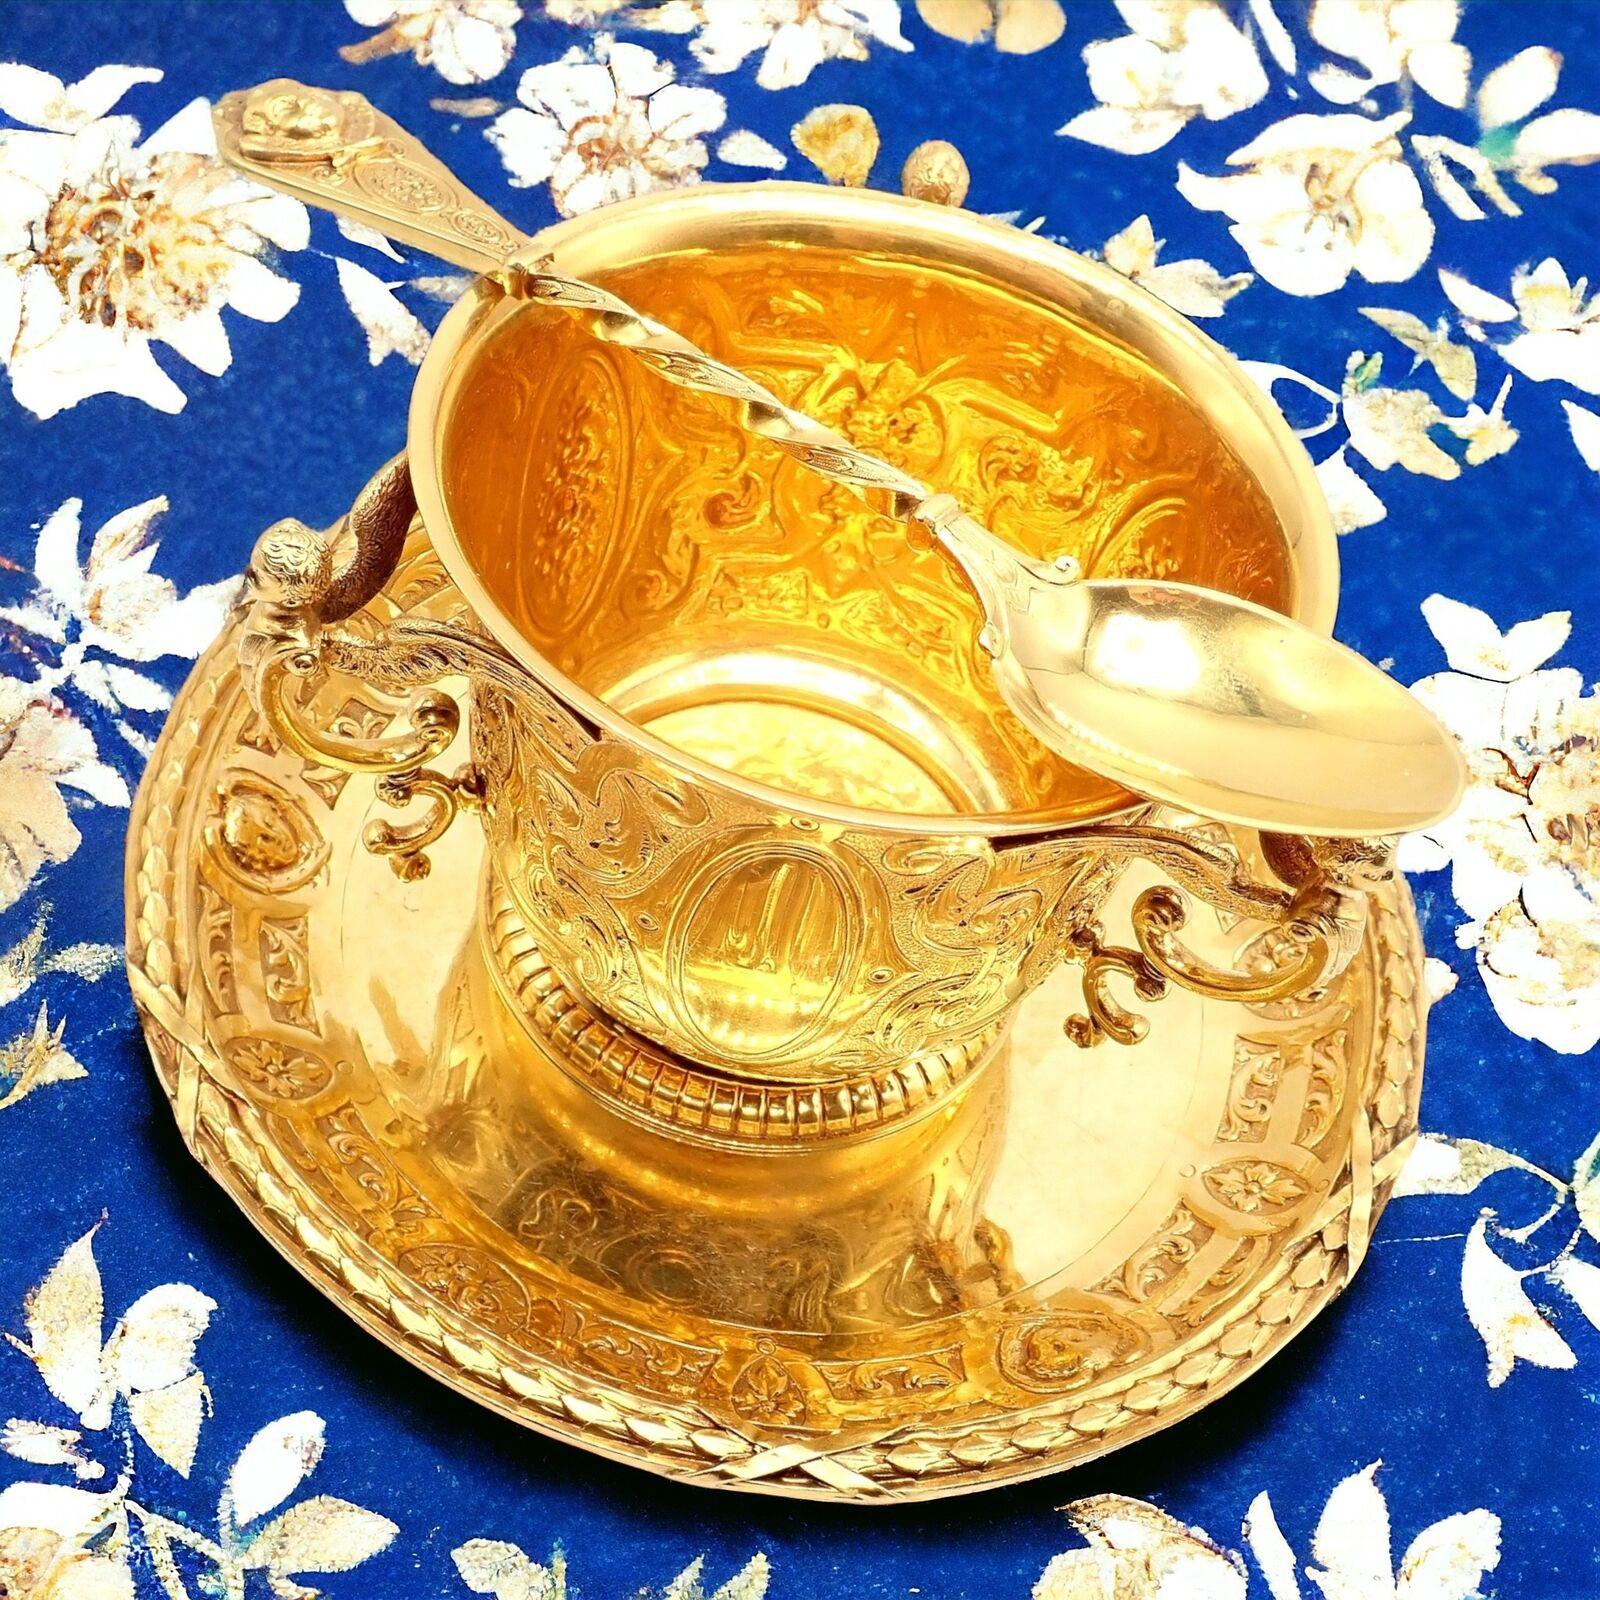 18k Solid Yellow Gold Set of Antique Sugar Bowl, Dish and Spoon by Abraham Portal circa 1779.
Abraham Portal's 18th century sugar dish, bowl, and spoon set, crafted from 18k gold, is a remarkable example of Georgian-era goldware. 
Originating from